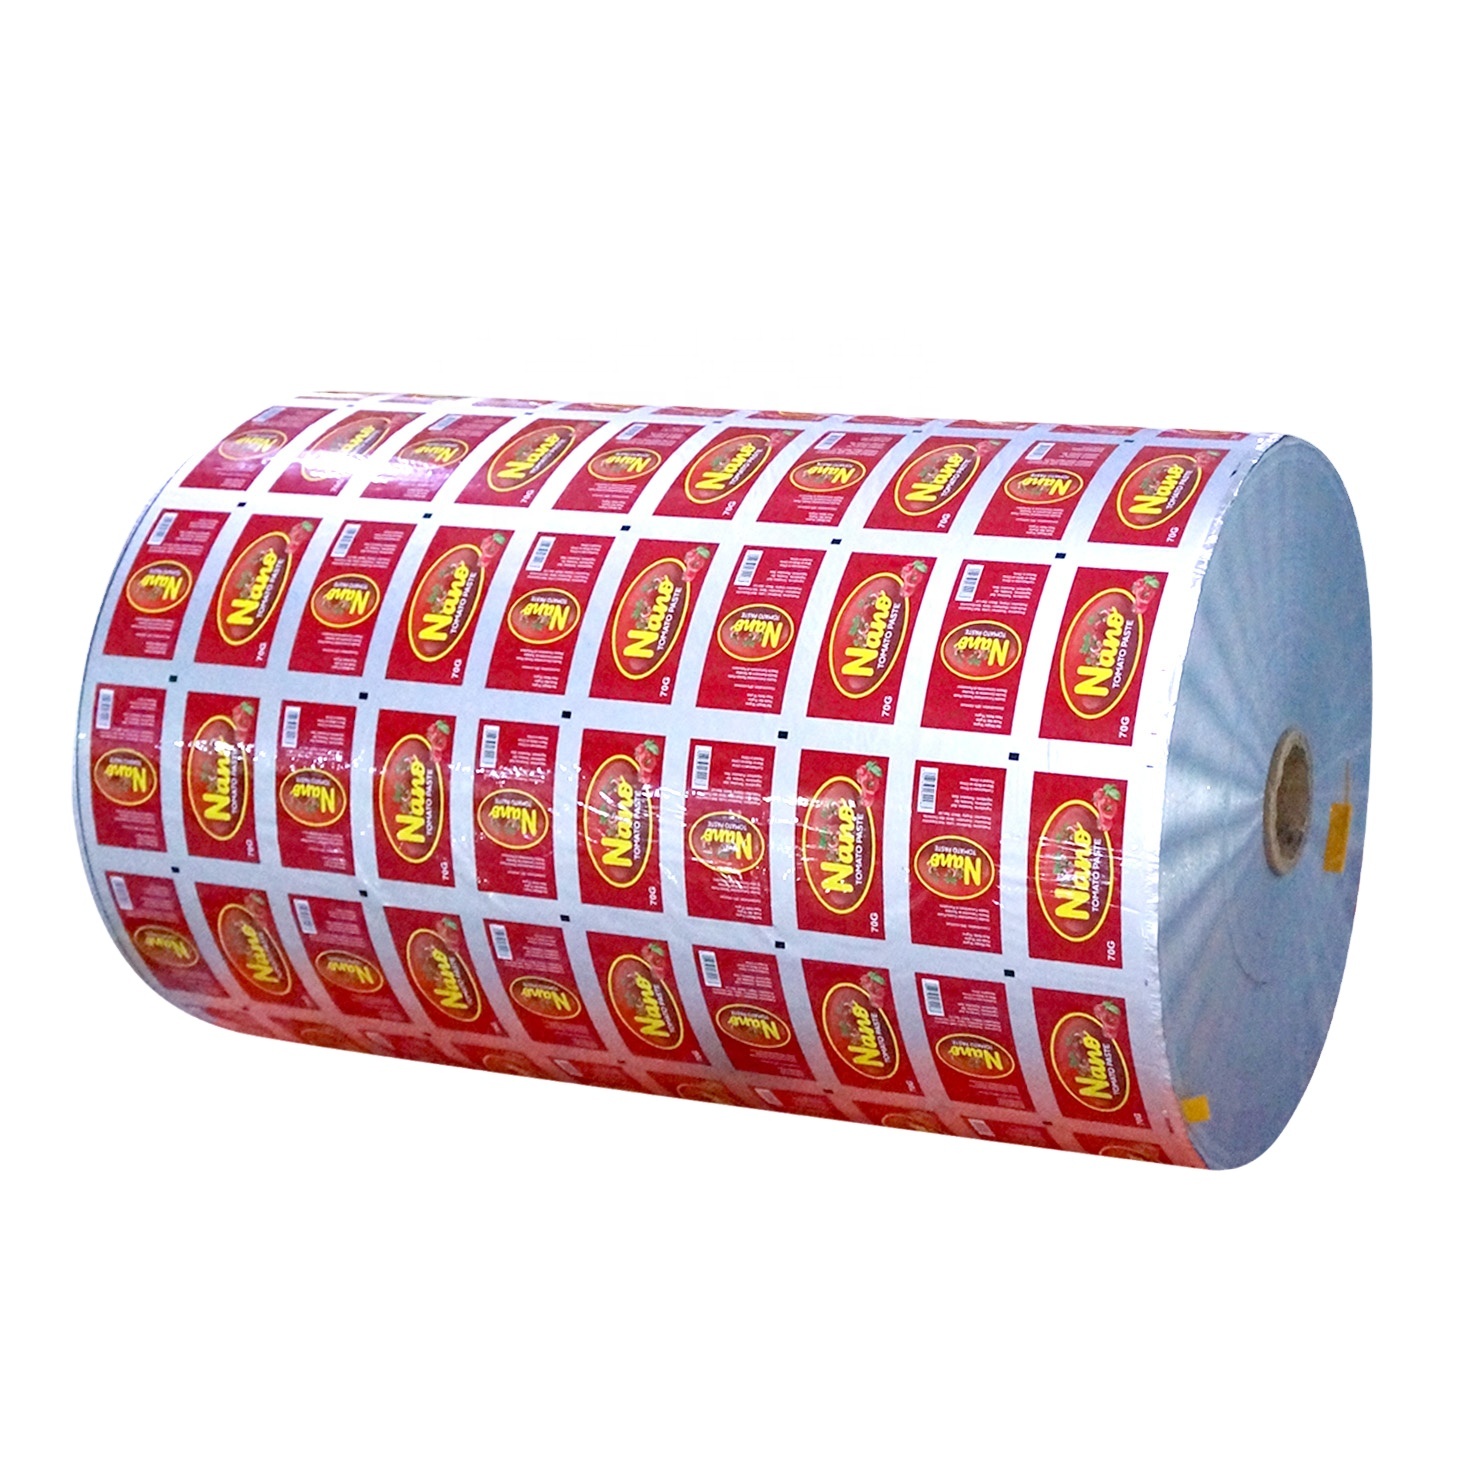 DQ PACK Laminating Roll Film Plastic roll stock double concentre de tomates plastic packaging film